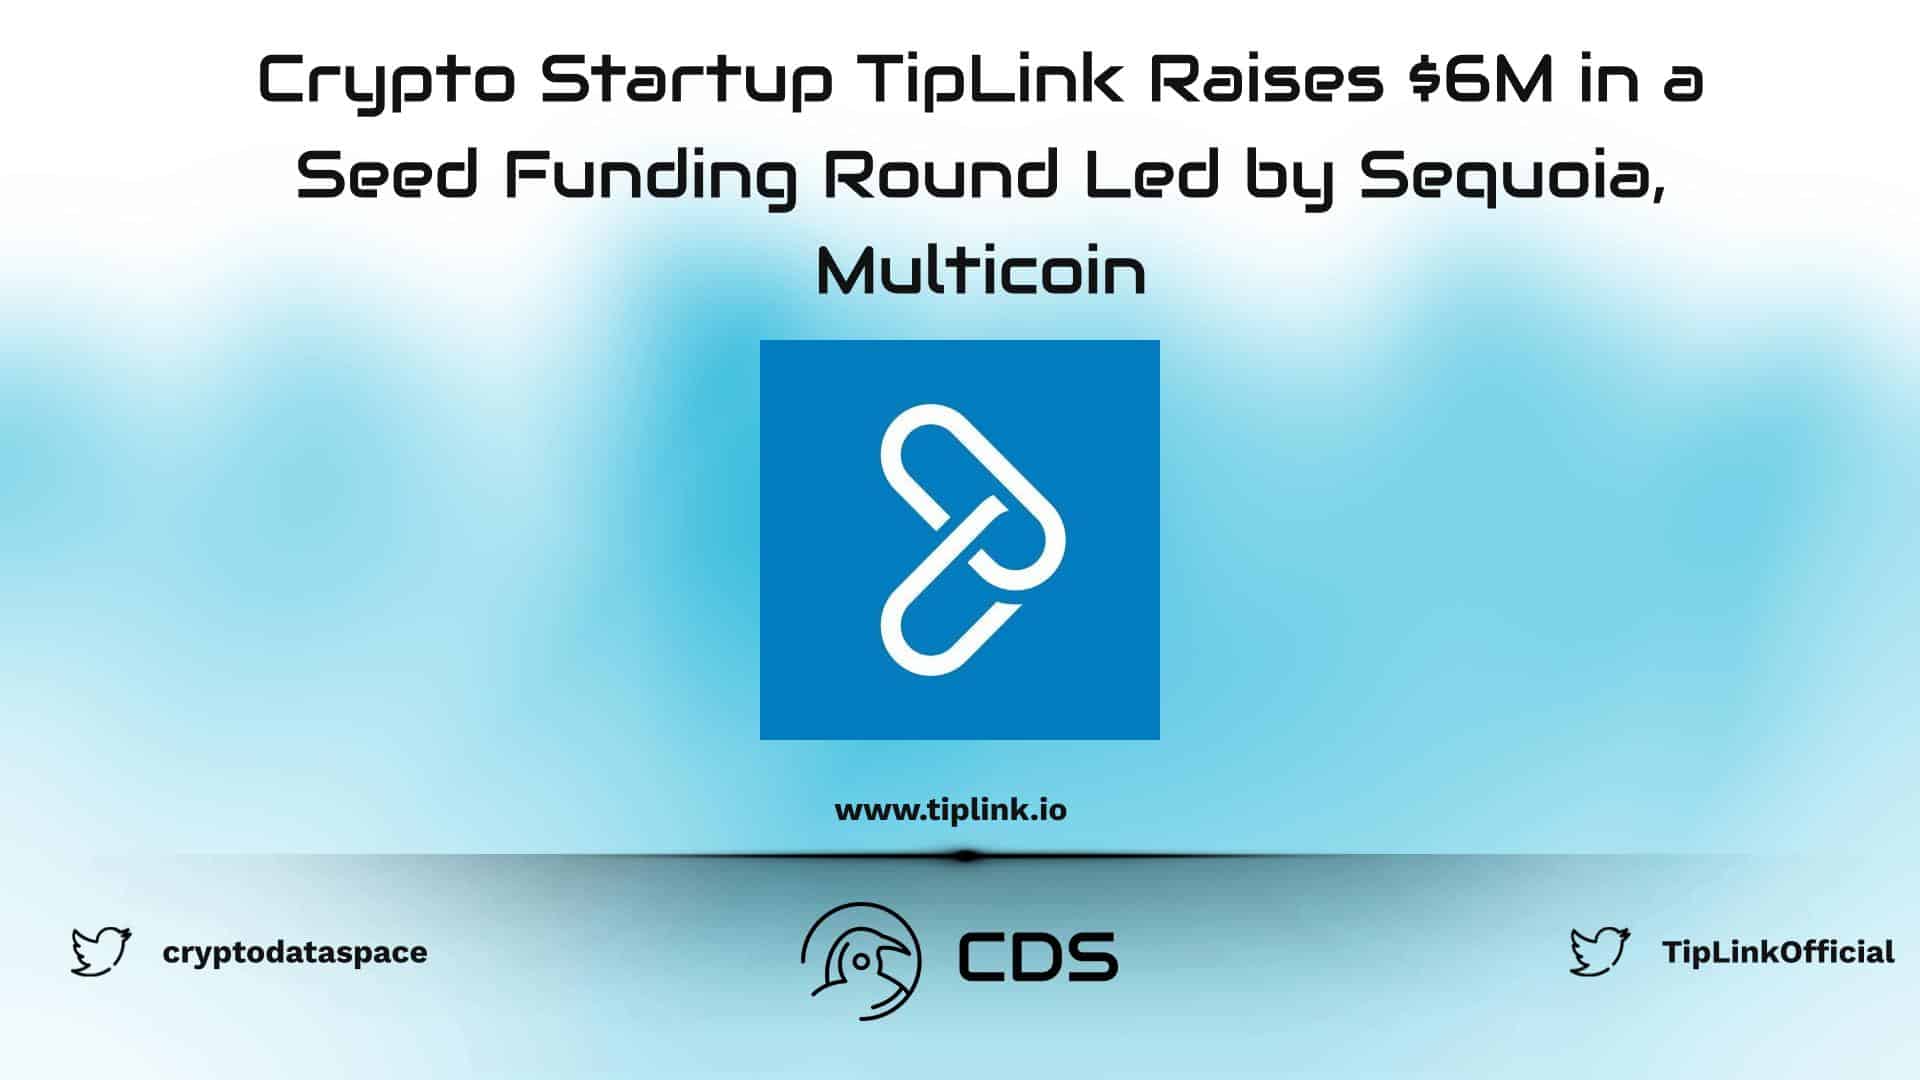 Crypto Startup TipLink Raises $6M in a Seed Funding Round Led by Sequoia, Multicoin